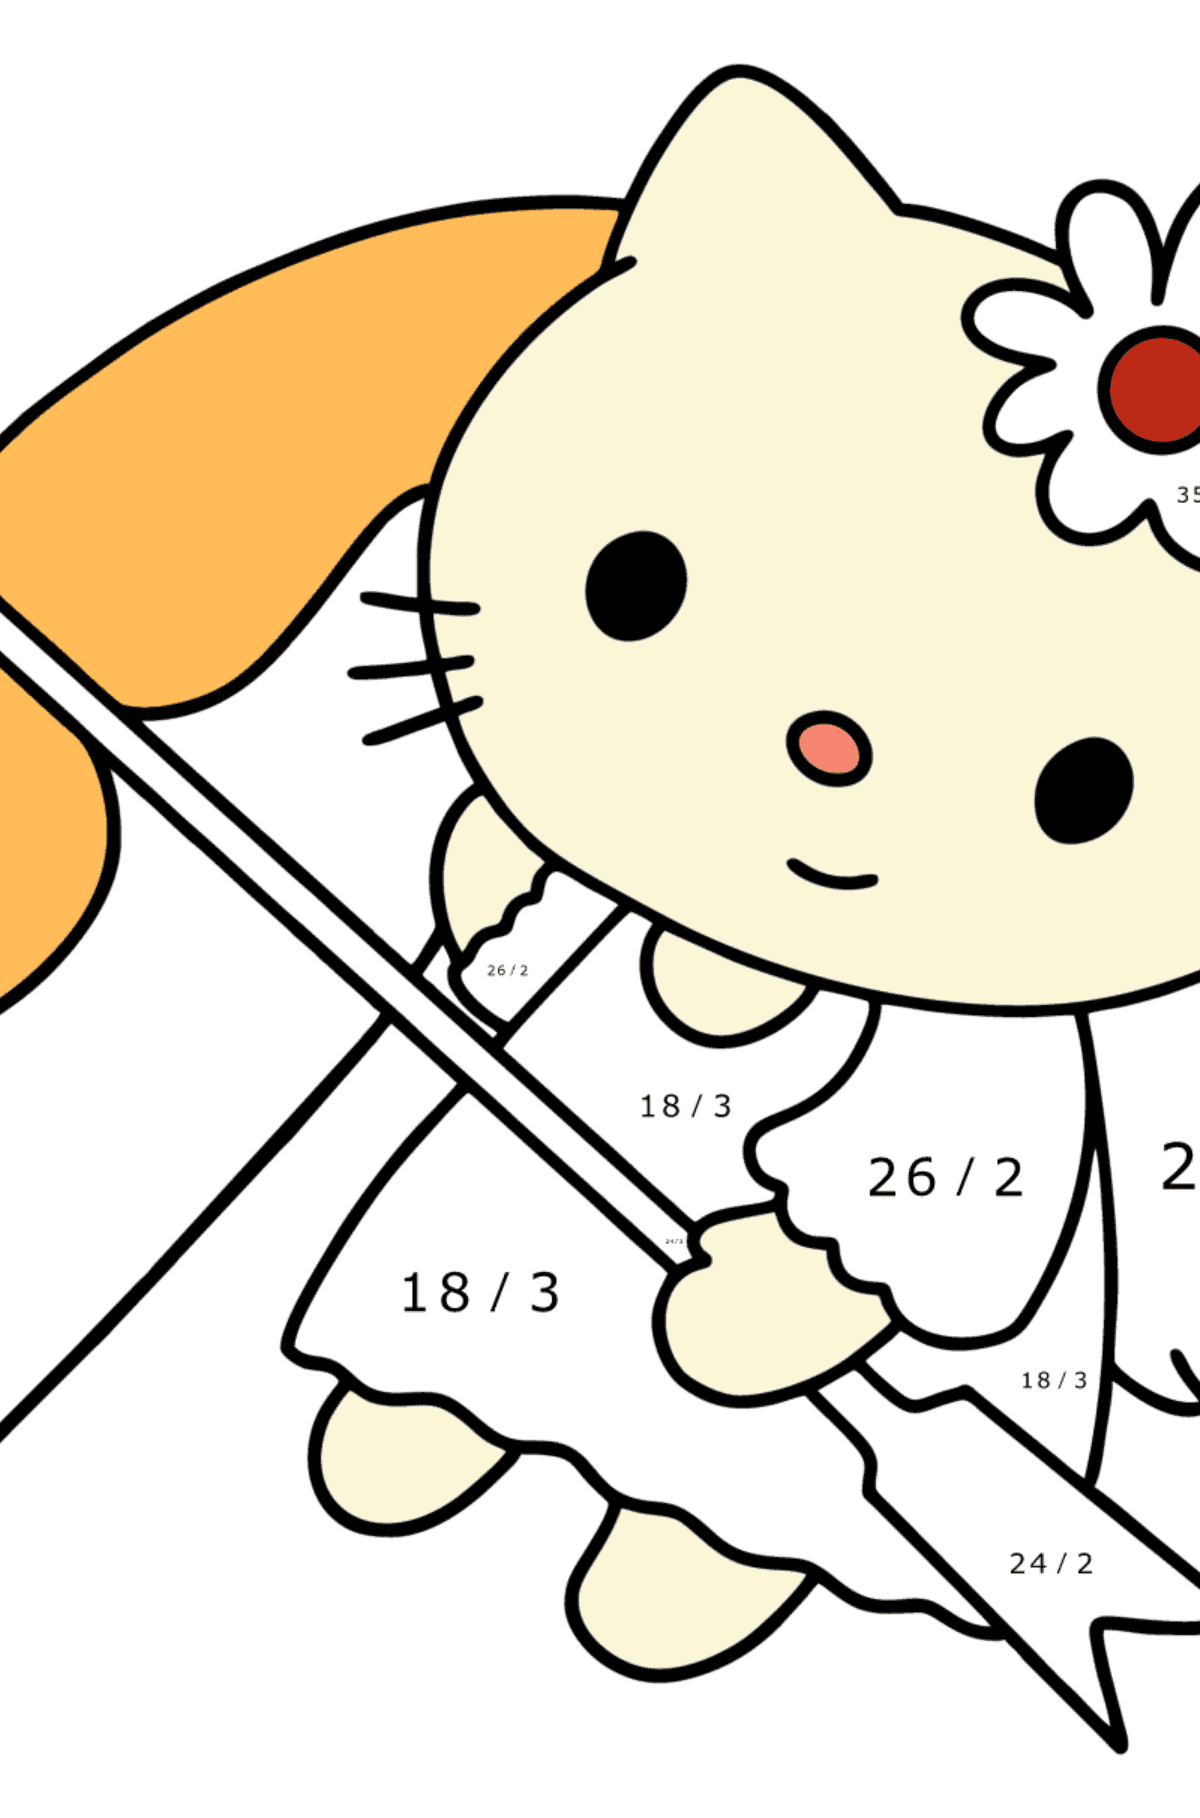 Hello Kitty on valentine's day coloring page - Math Coloring - Division for Kids